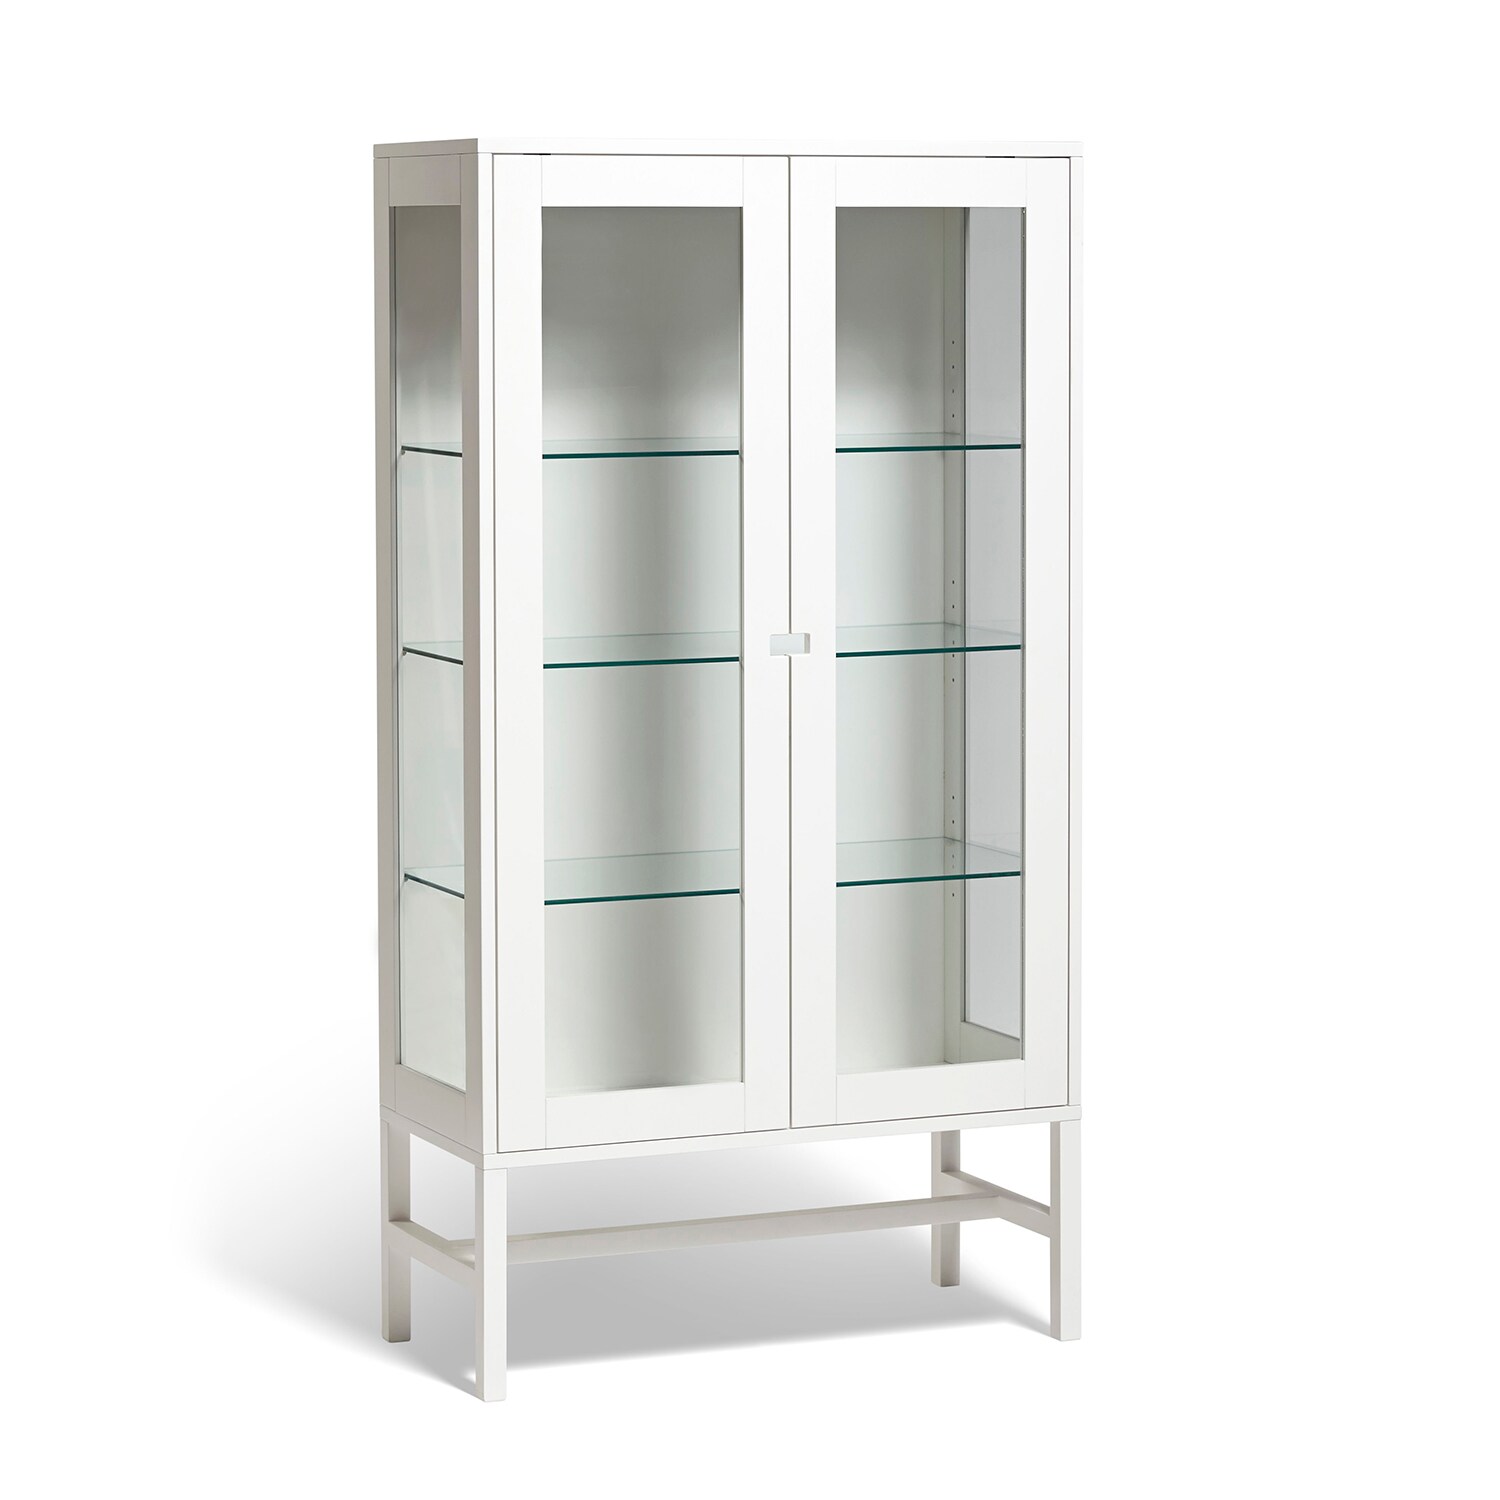 Falsterbo Cabinet Glass Shelves 150 Cm, White Cabinet With Doors And Shelves